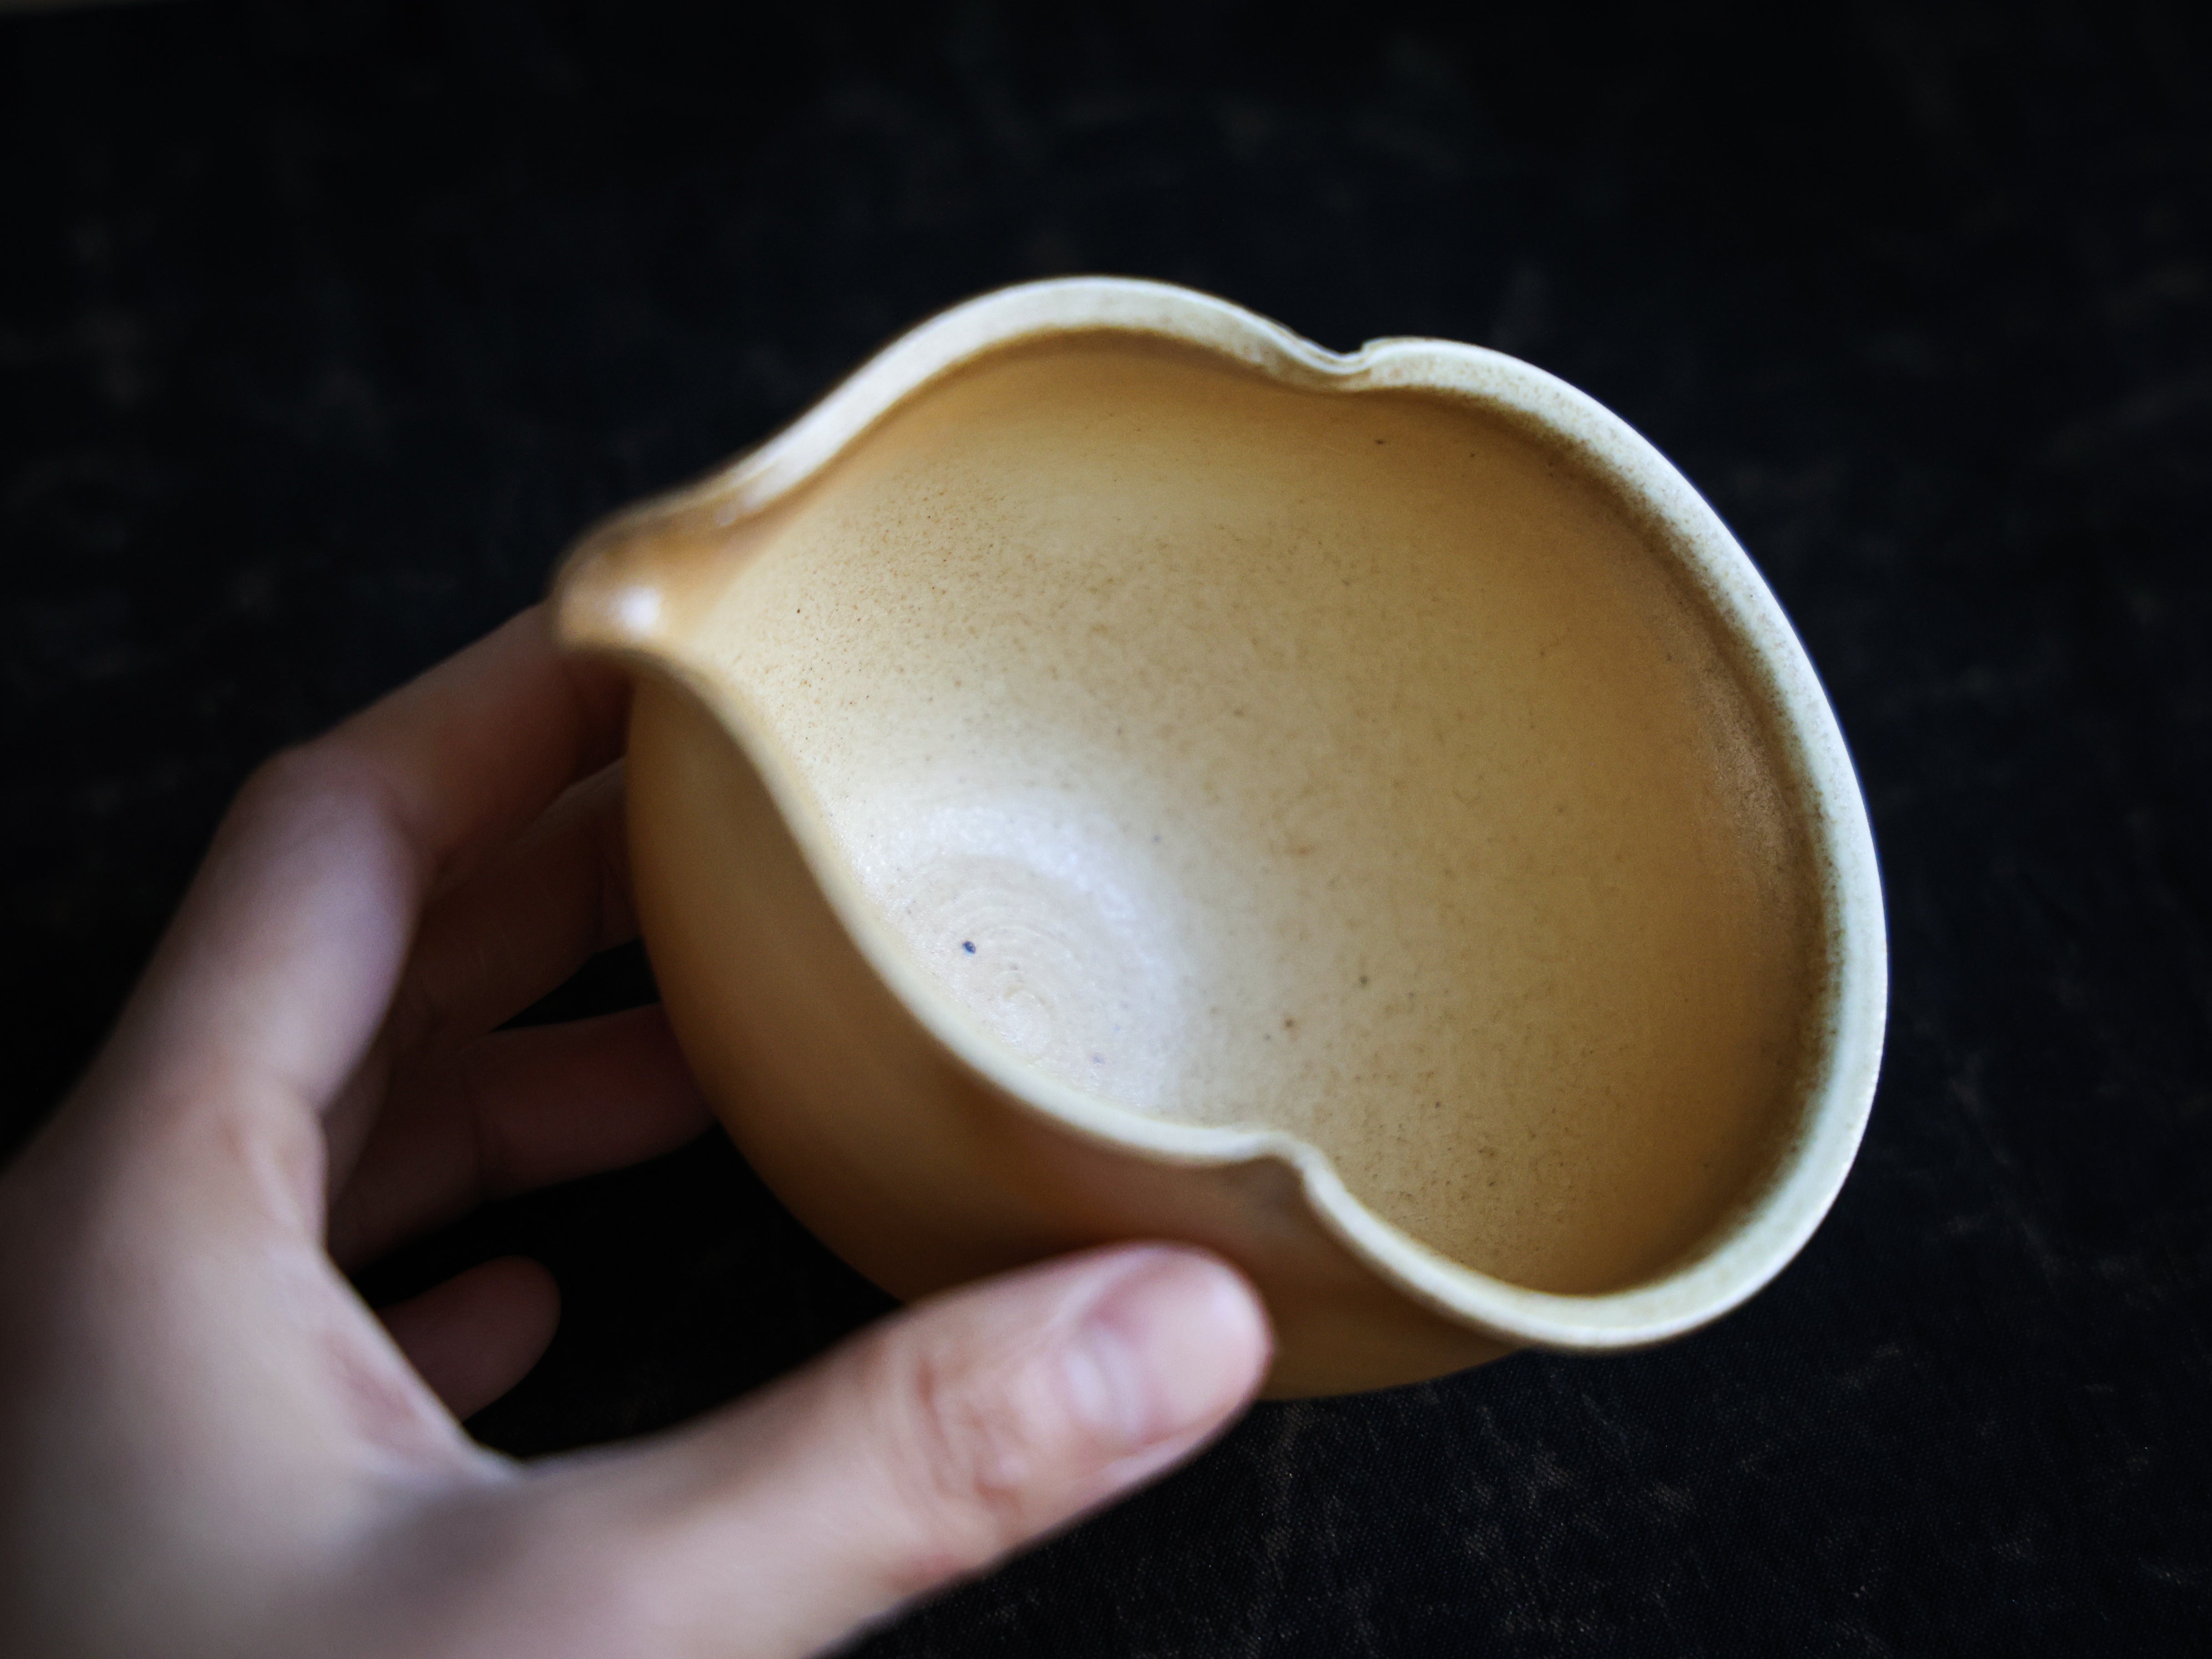 Terra-cotta Woodfired Faircup